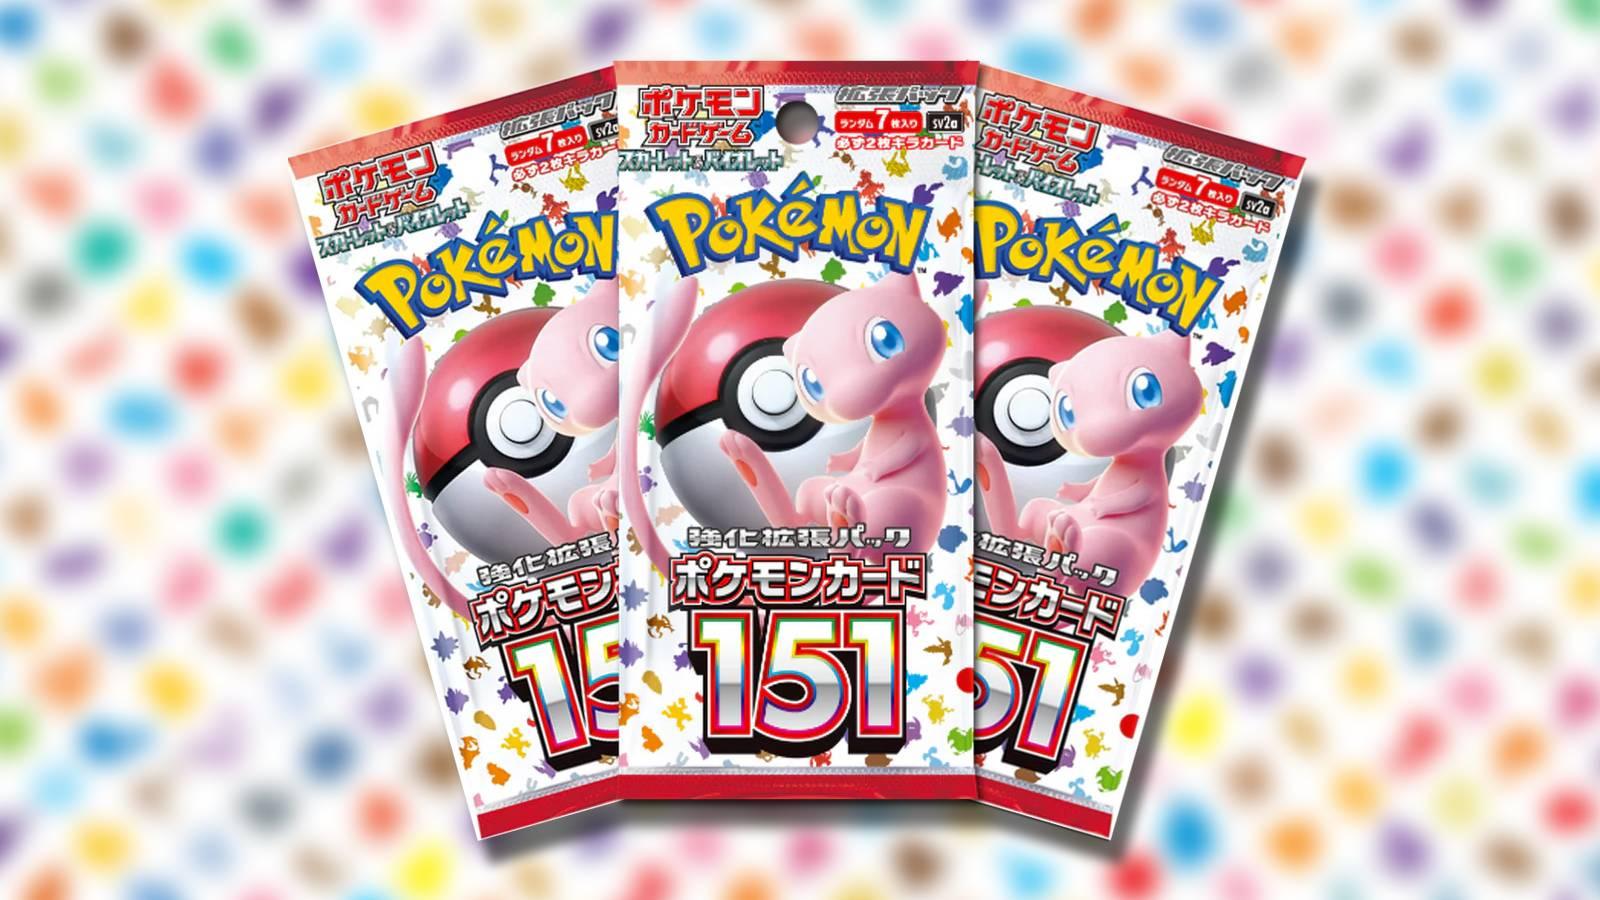 Japanese Pokemon TCG 151 Booster Packs are visible against a blurred background